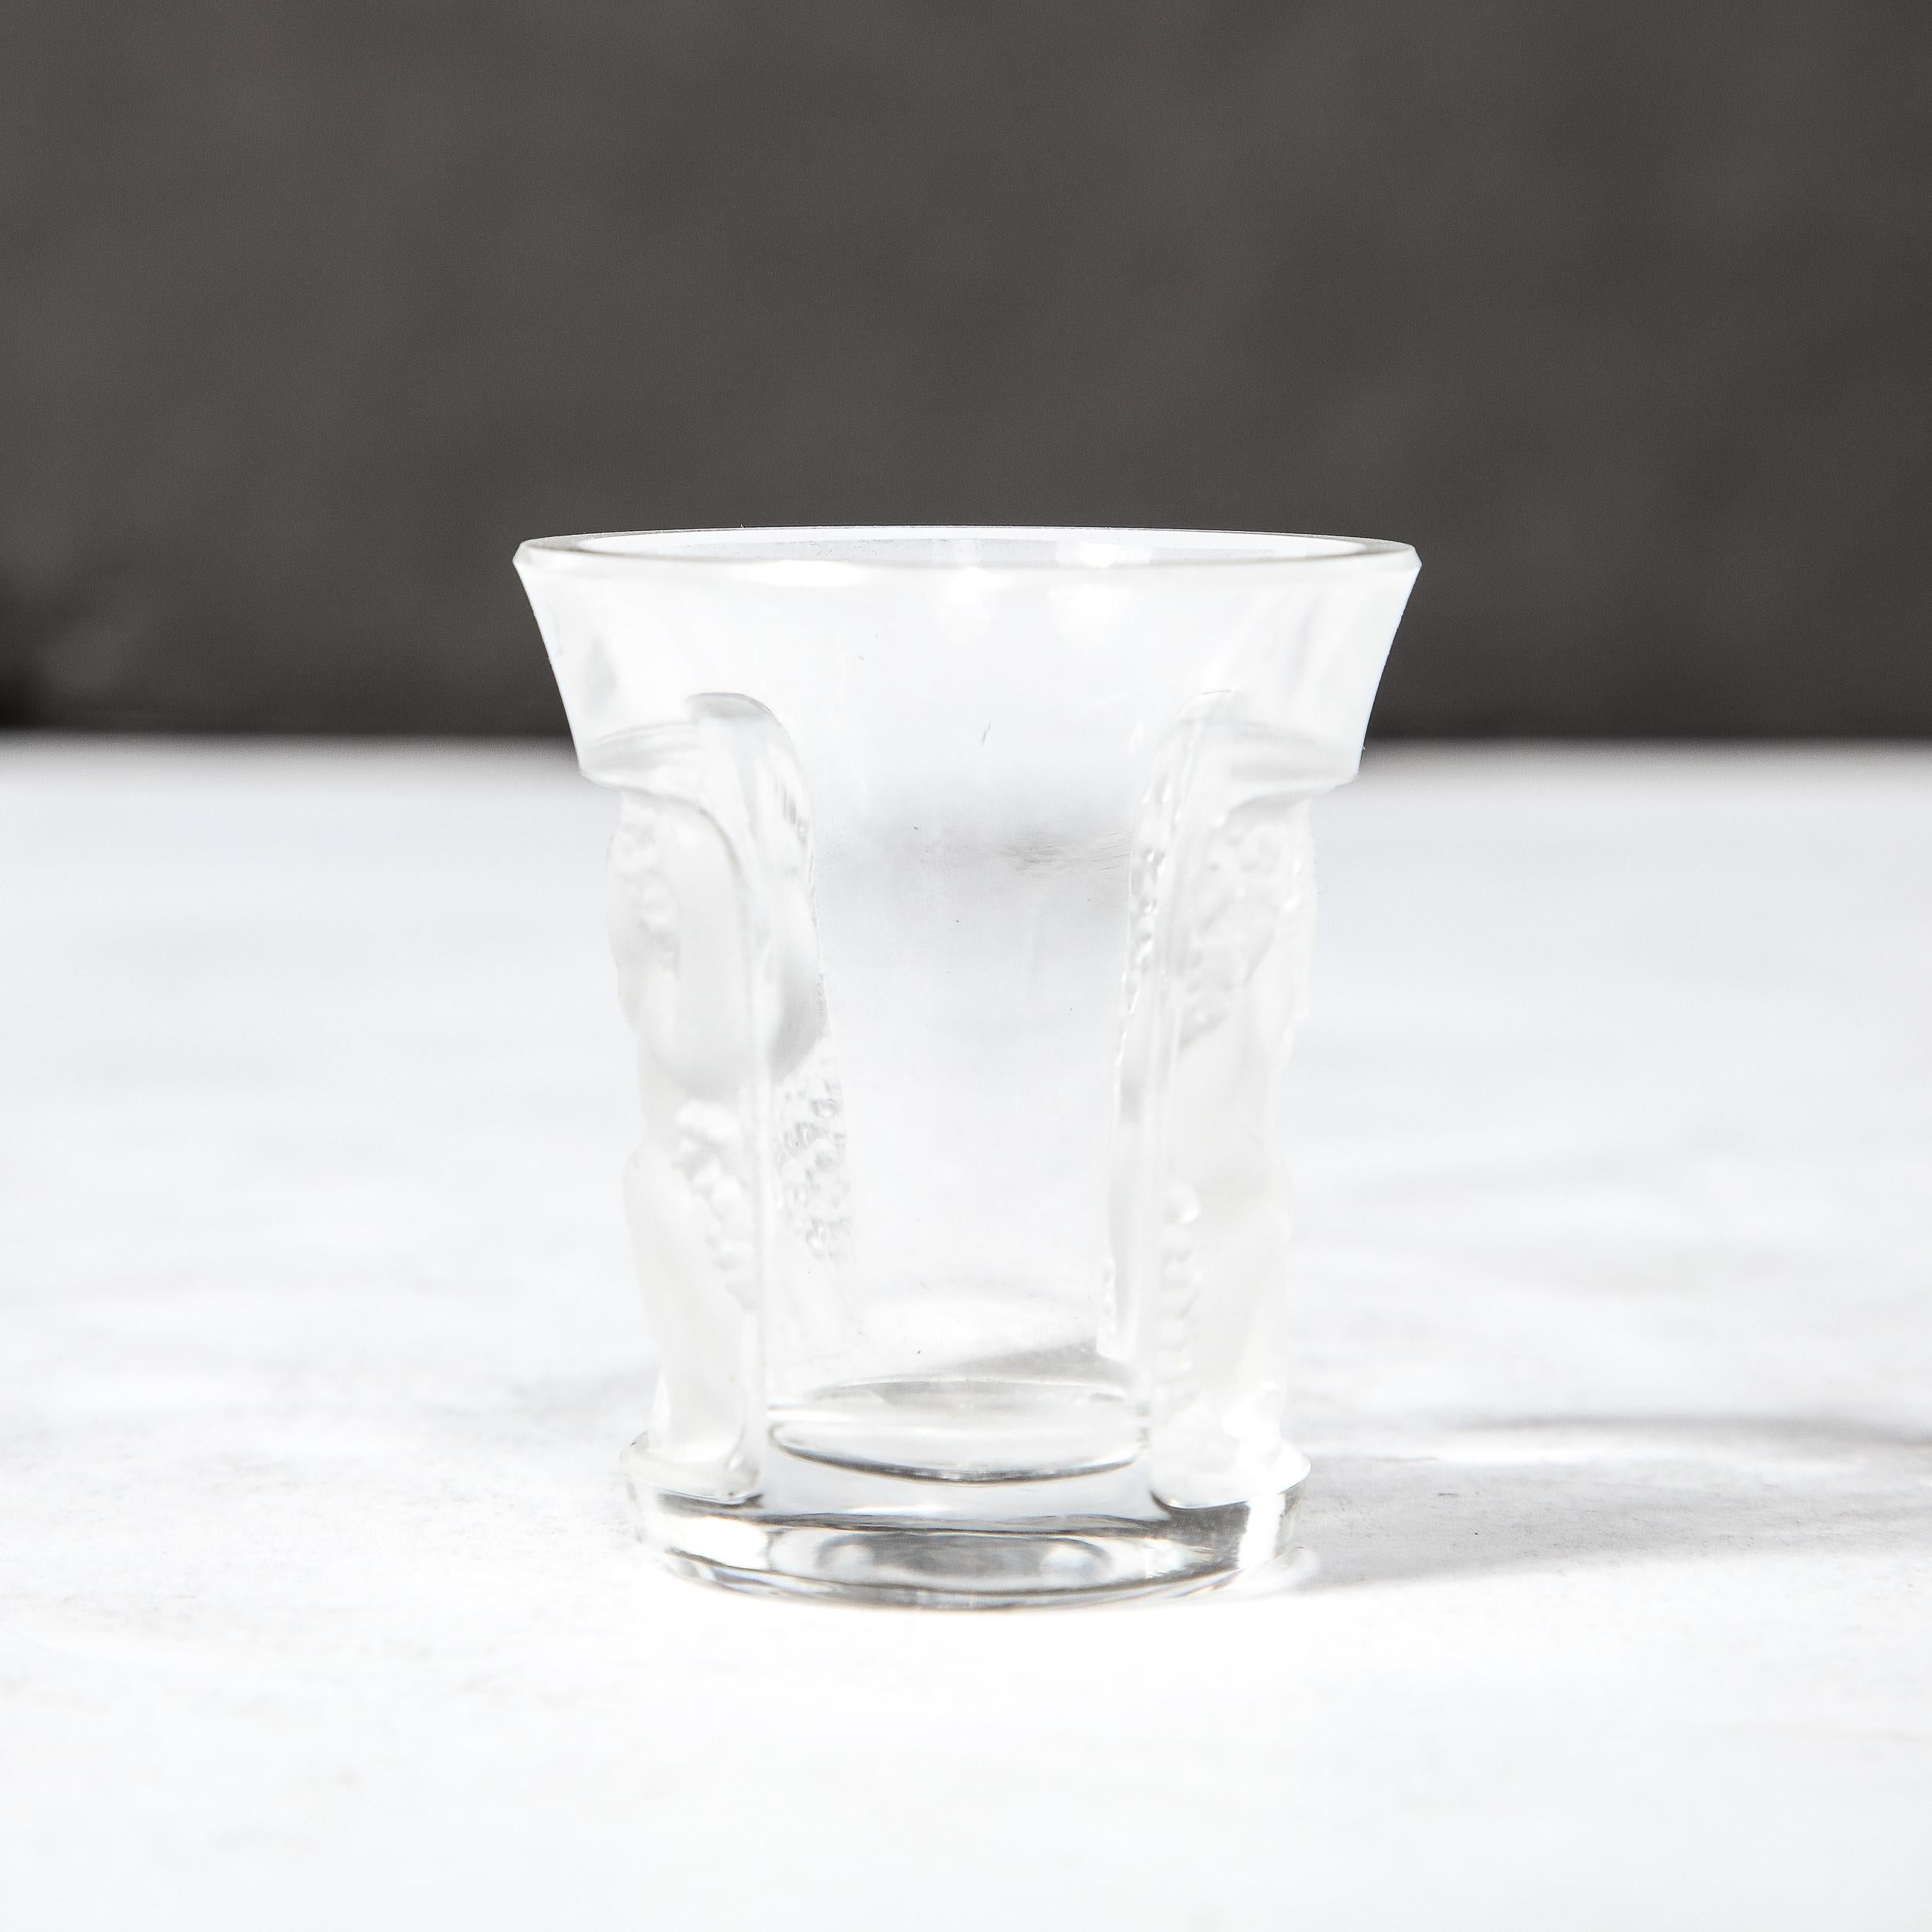 Early 20th Century Art Deco Shot Glass with Molded and Frosted Neoclassical Motifs signed Lalique